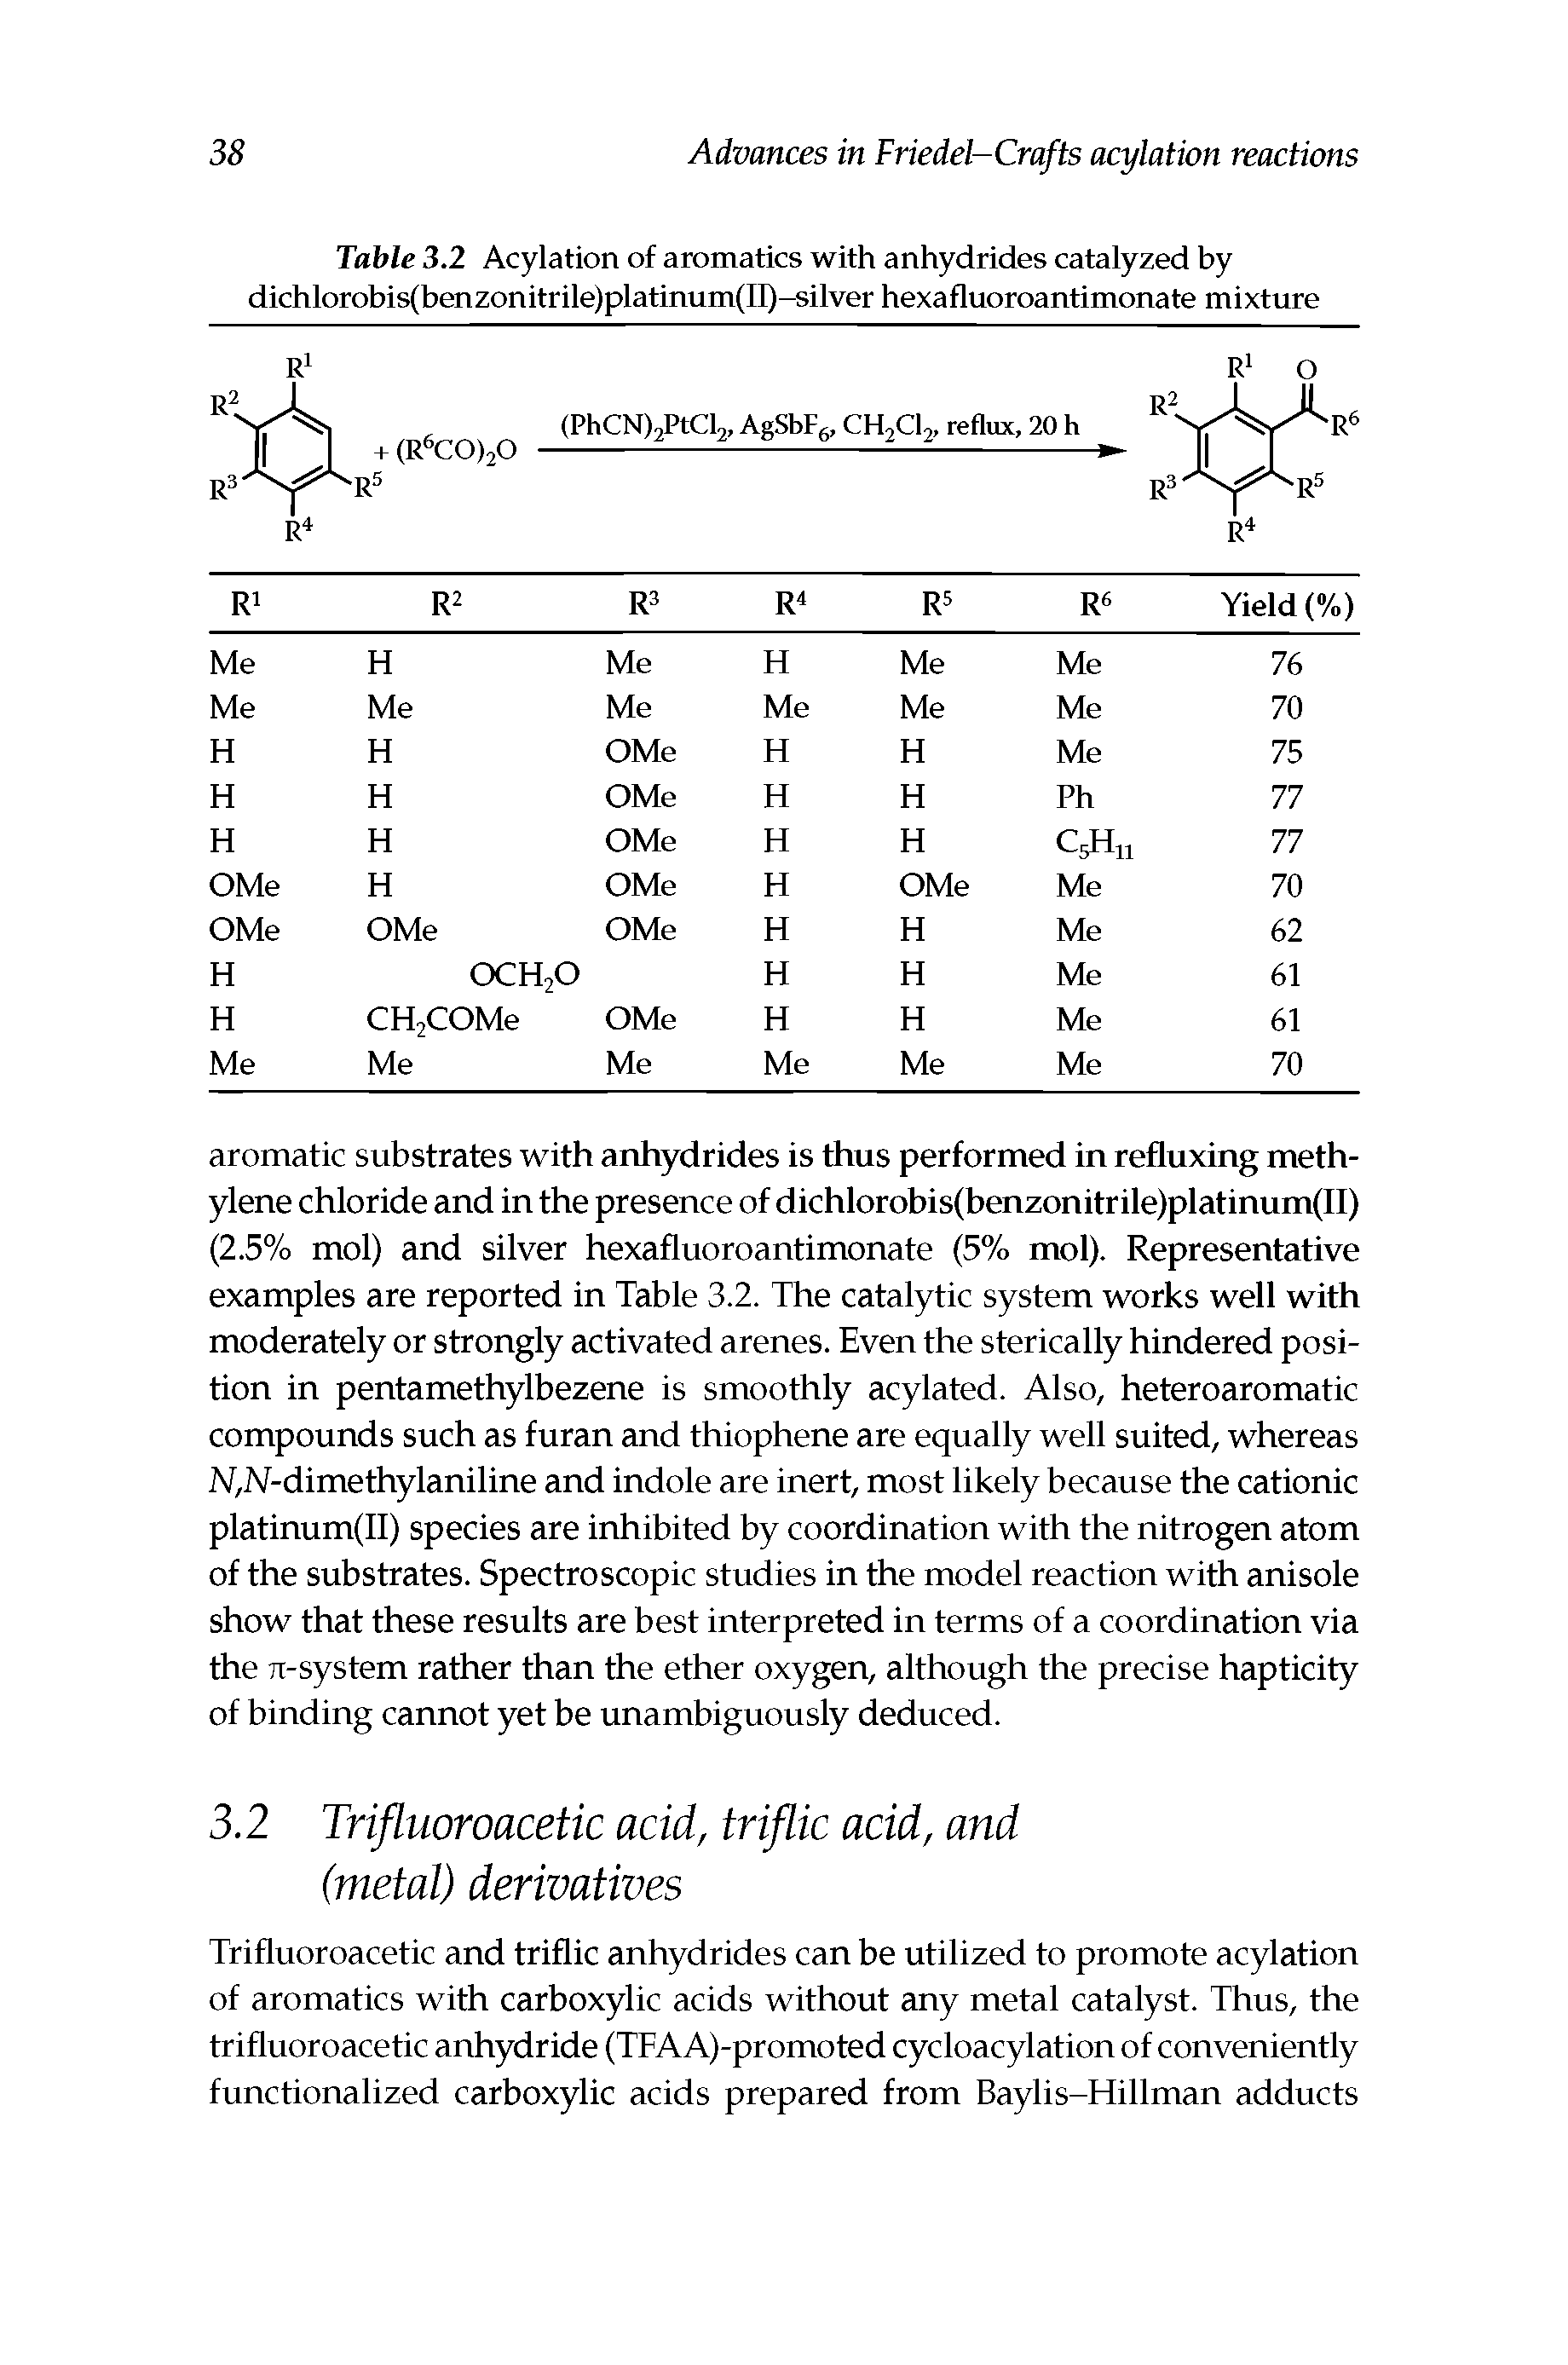 Table 3.2 Acylation of aromatics with anhydrides catalyzed by dichlorobis(benzonitrile)platinum(Il)-silver hexafluoroantimonate mixture...